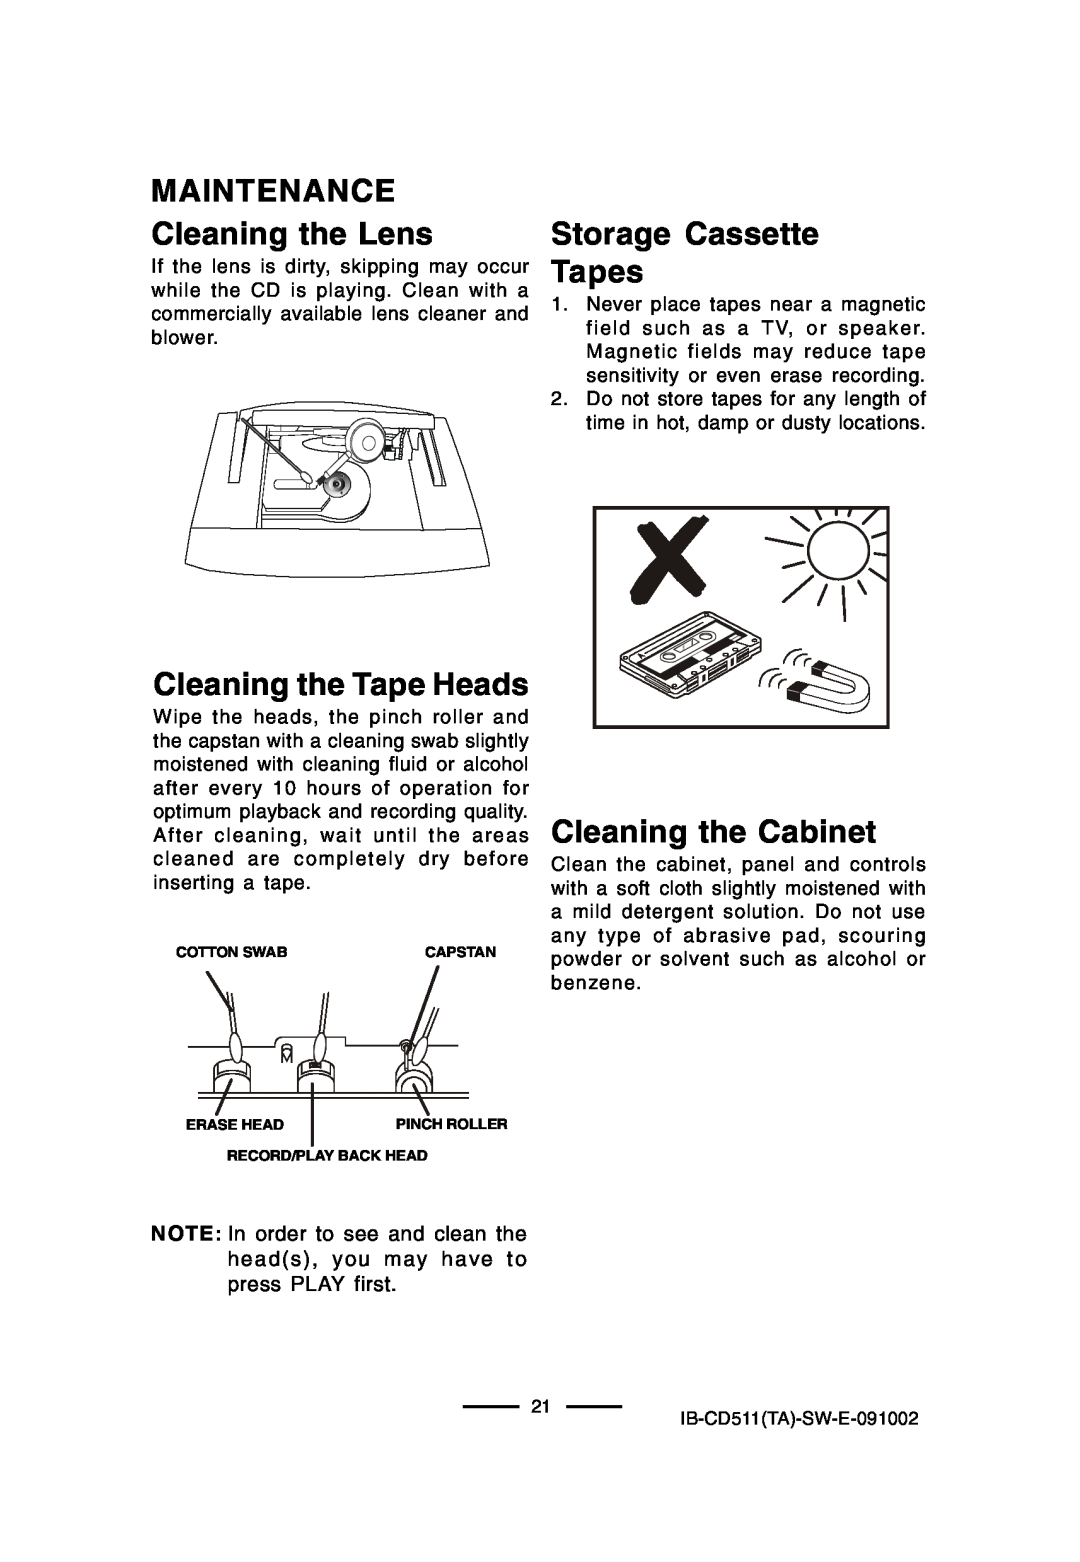 Lenoxx Electronics CD-511 manual MAINTENANCE Cleaning the Lens, Cleaning the Tape Heads, Storage Cassette Tapes 